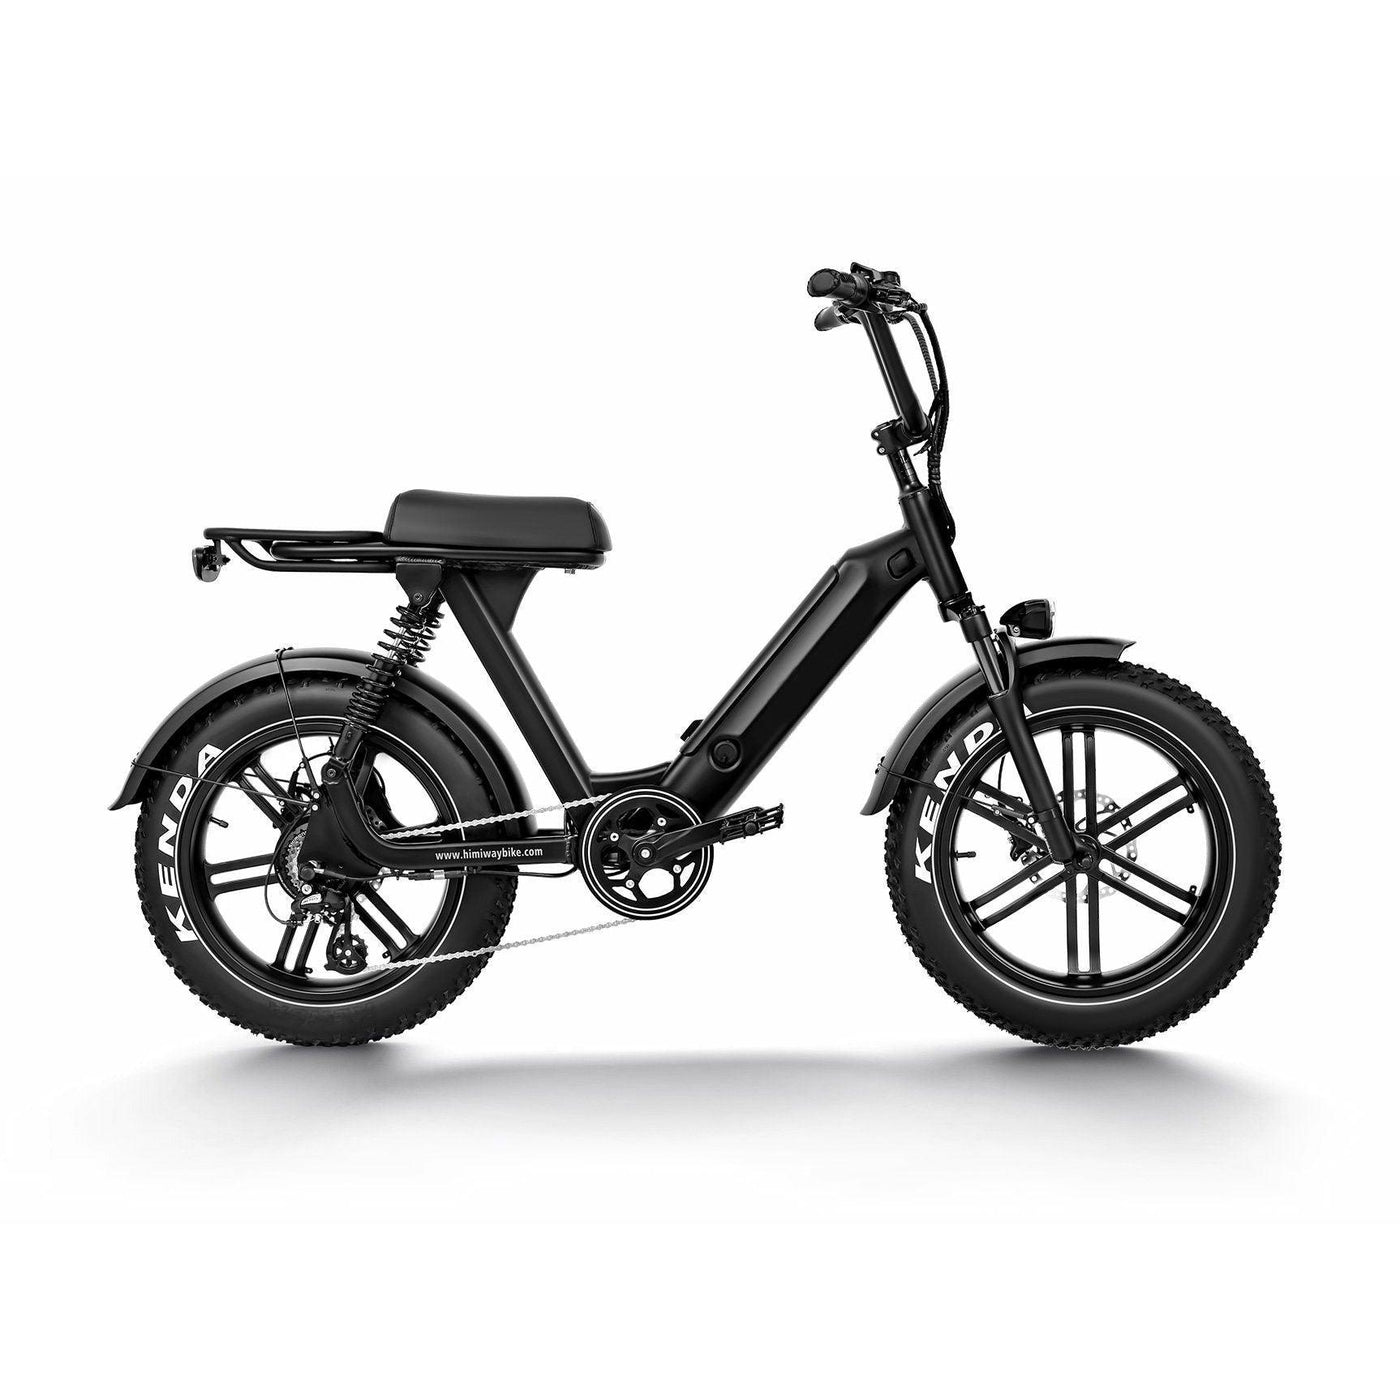 GlareWheel 750W Fat Tire Moped-Style Electric Bicycle EB-AG